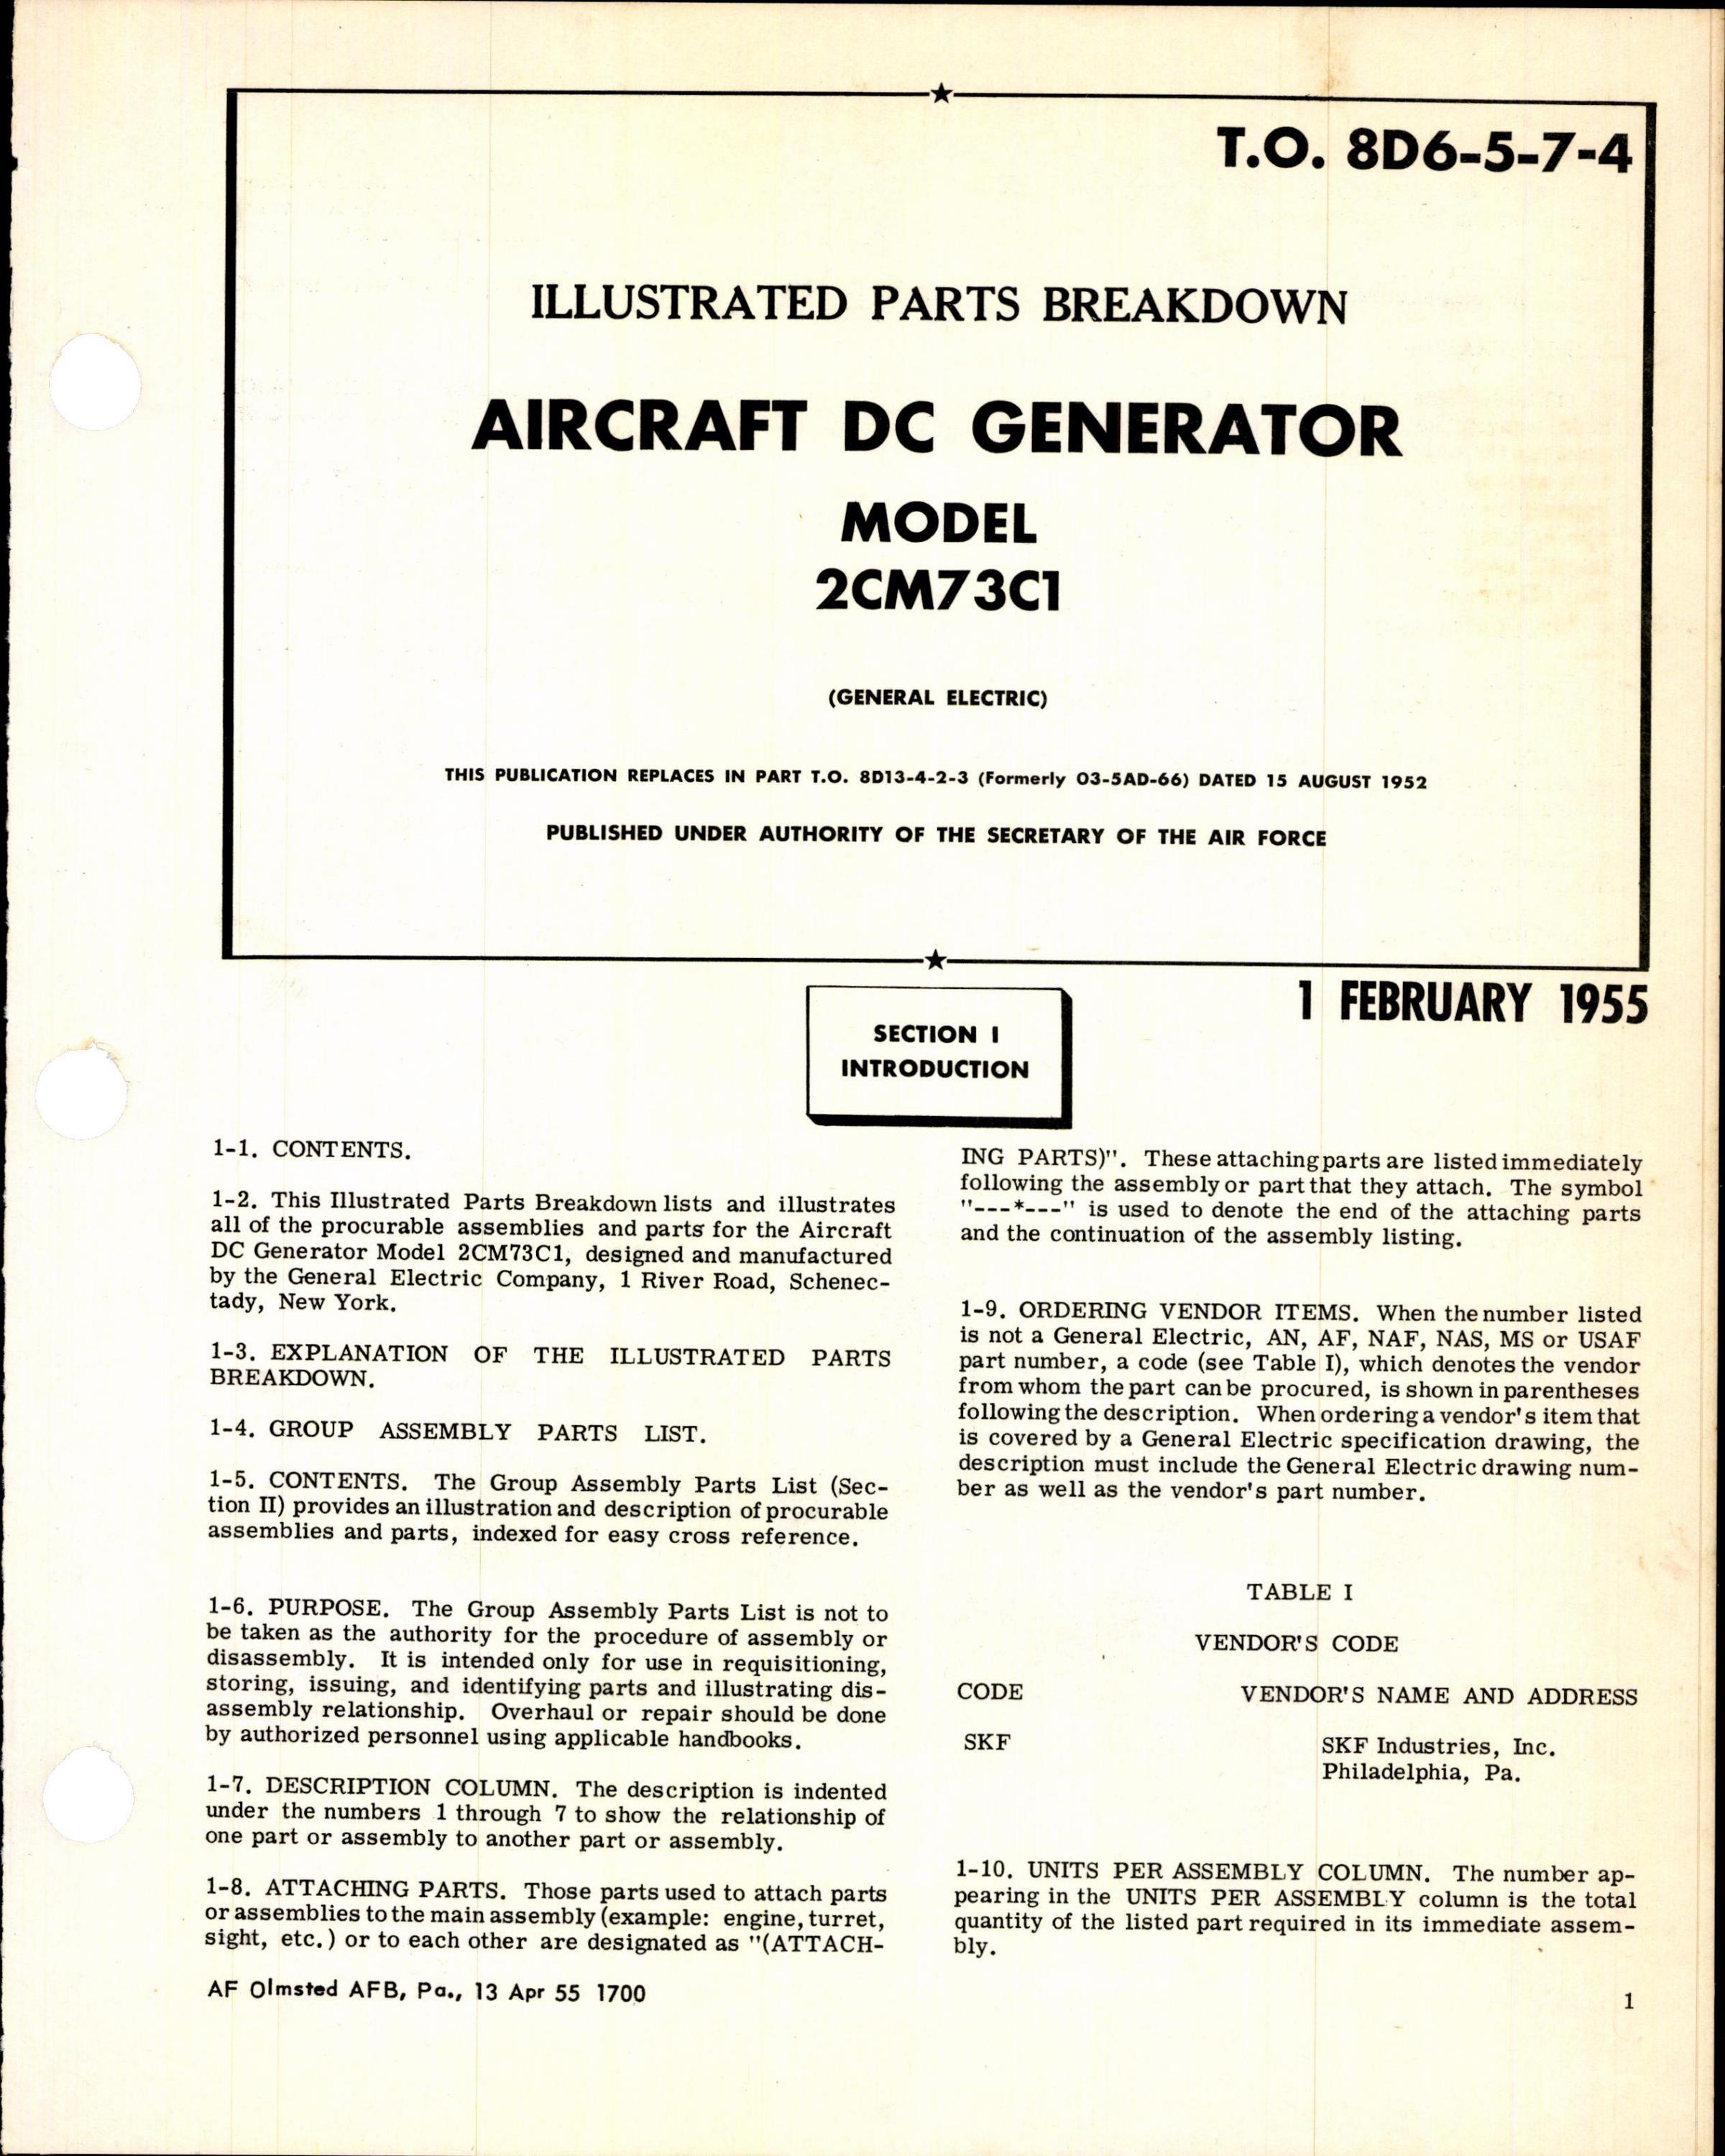 Sample page 1 from AirCorps Library document: Parts Breakdown for Aircraft Generator Model